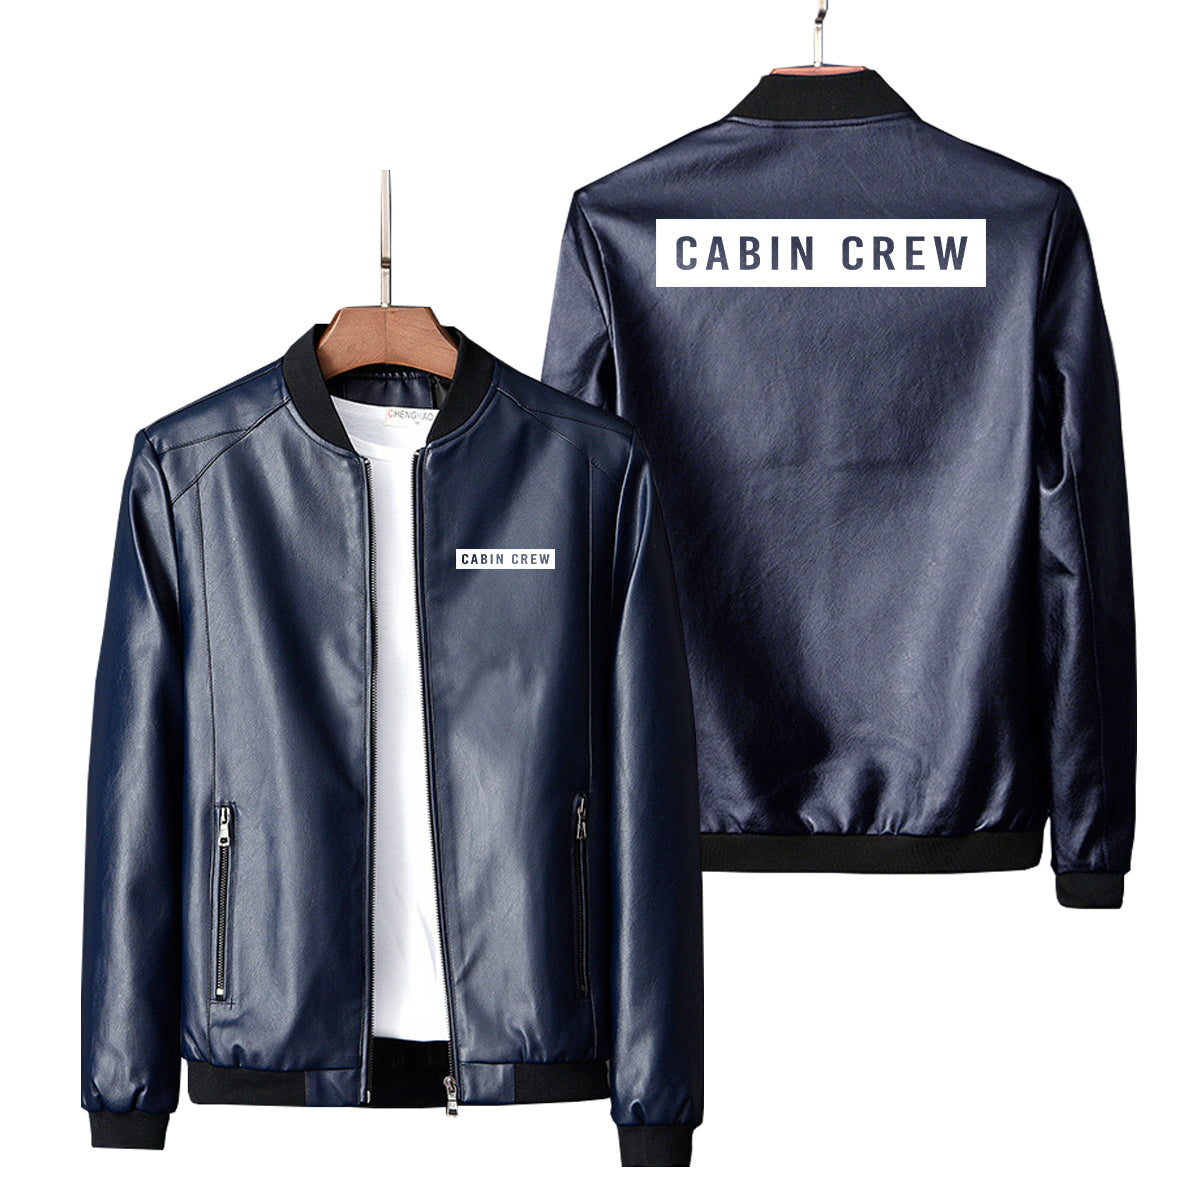 Cabin Crew Text Designed PU Leather Jackets